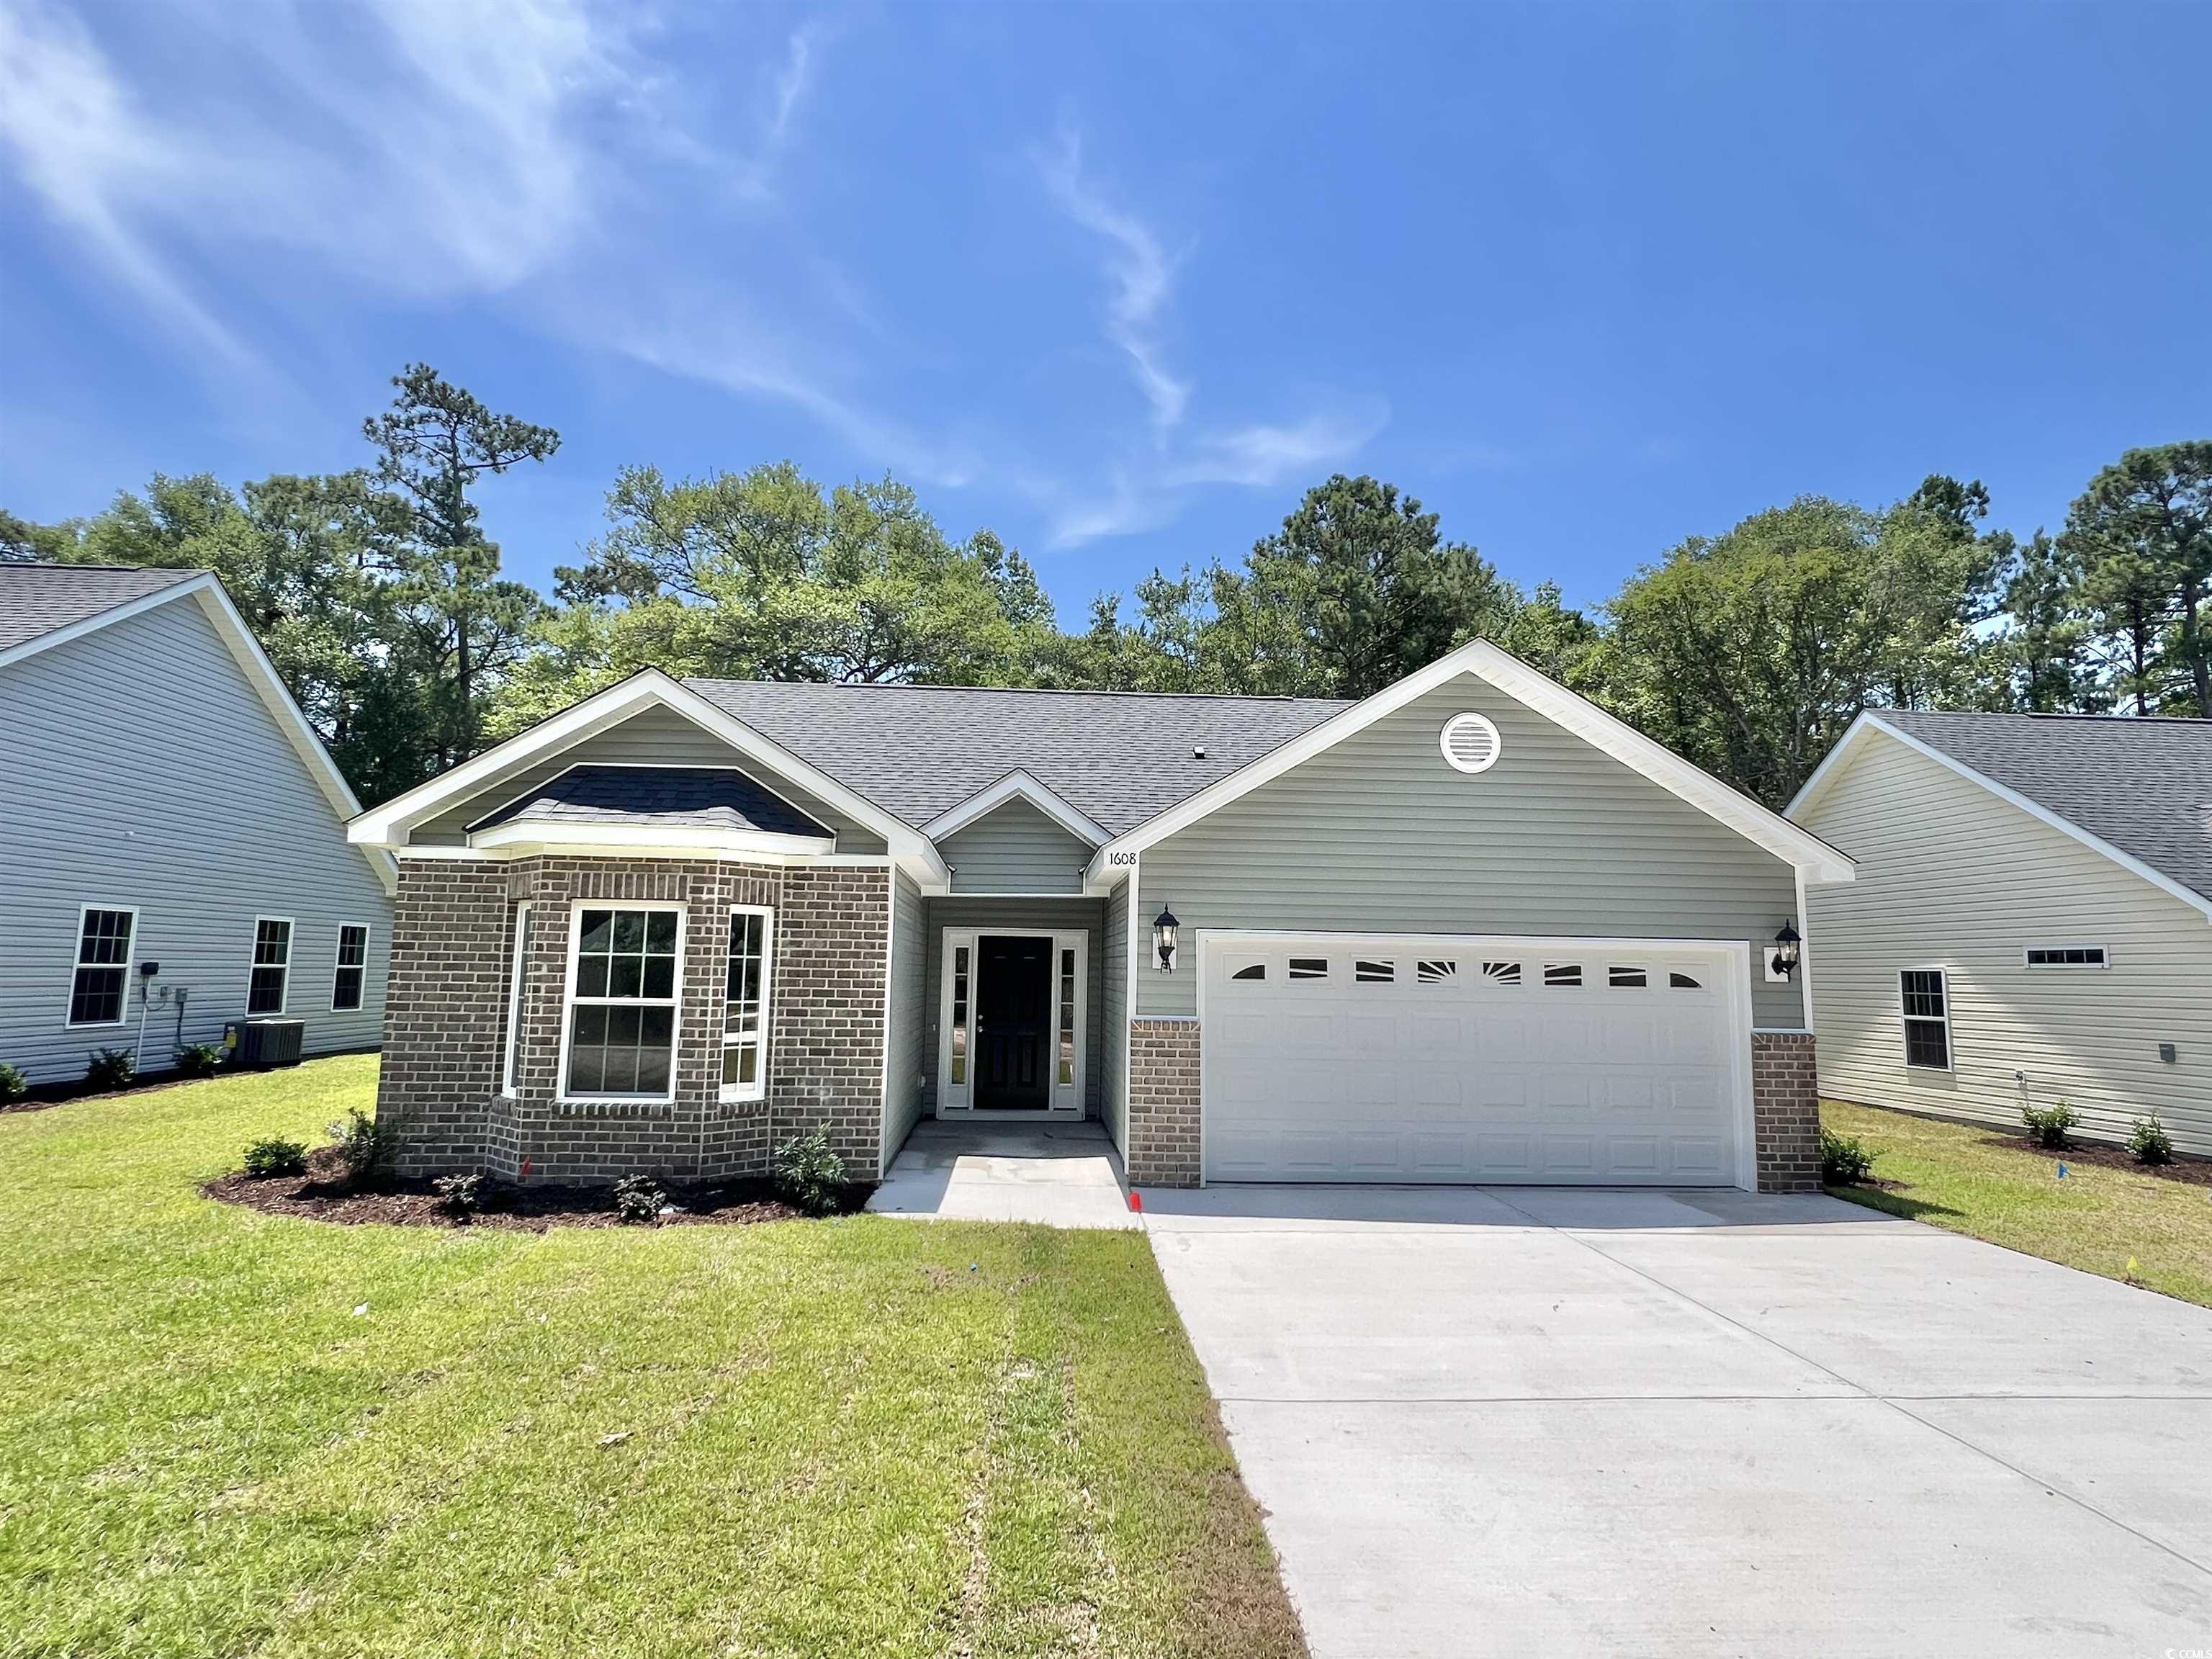 1608 San Andres Ave. Little River, SC 29566